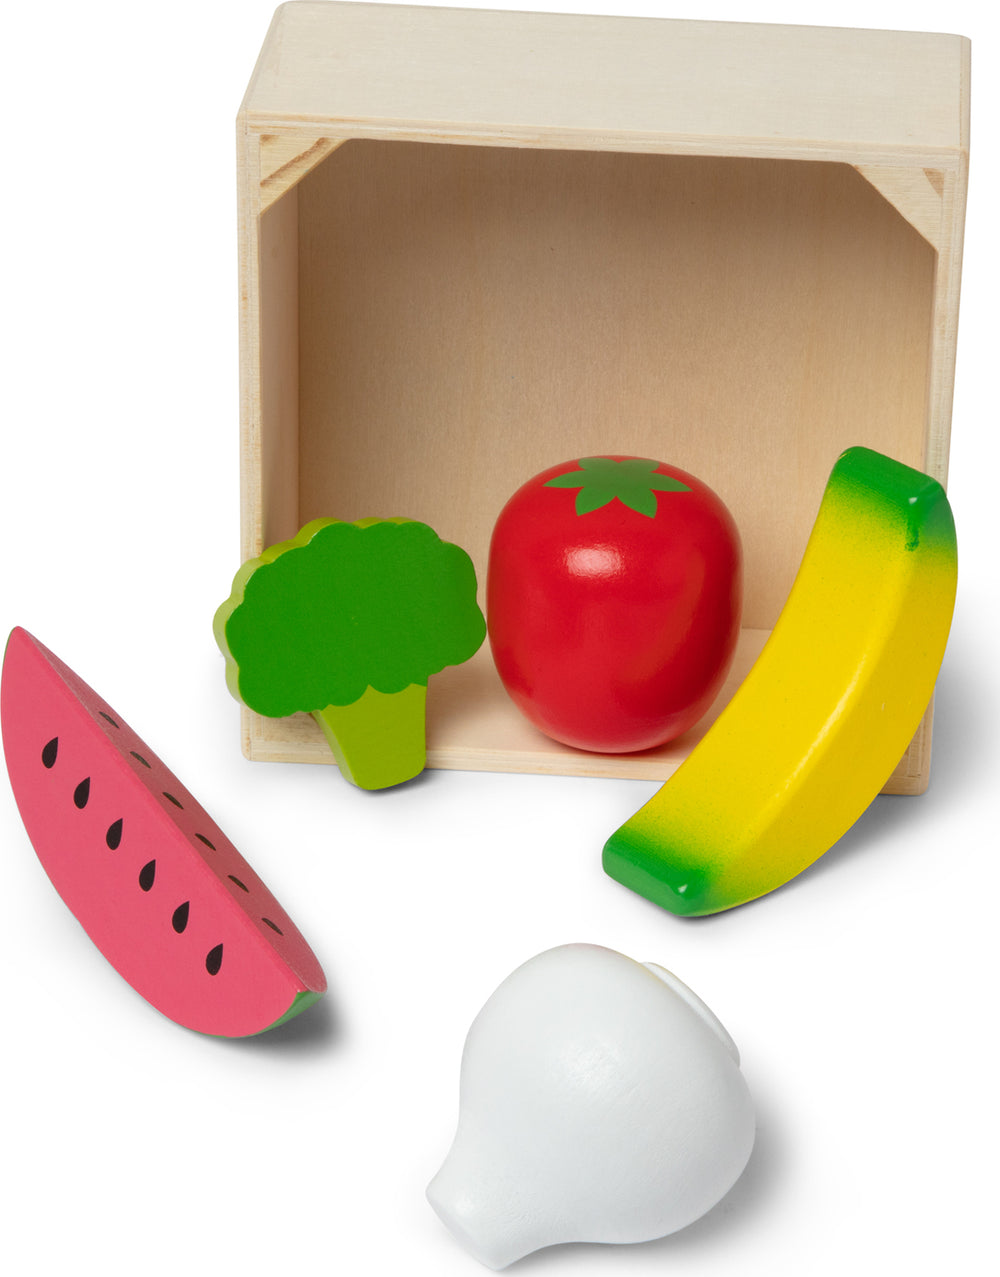 Wooden Food Groups Play Set - Produce